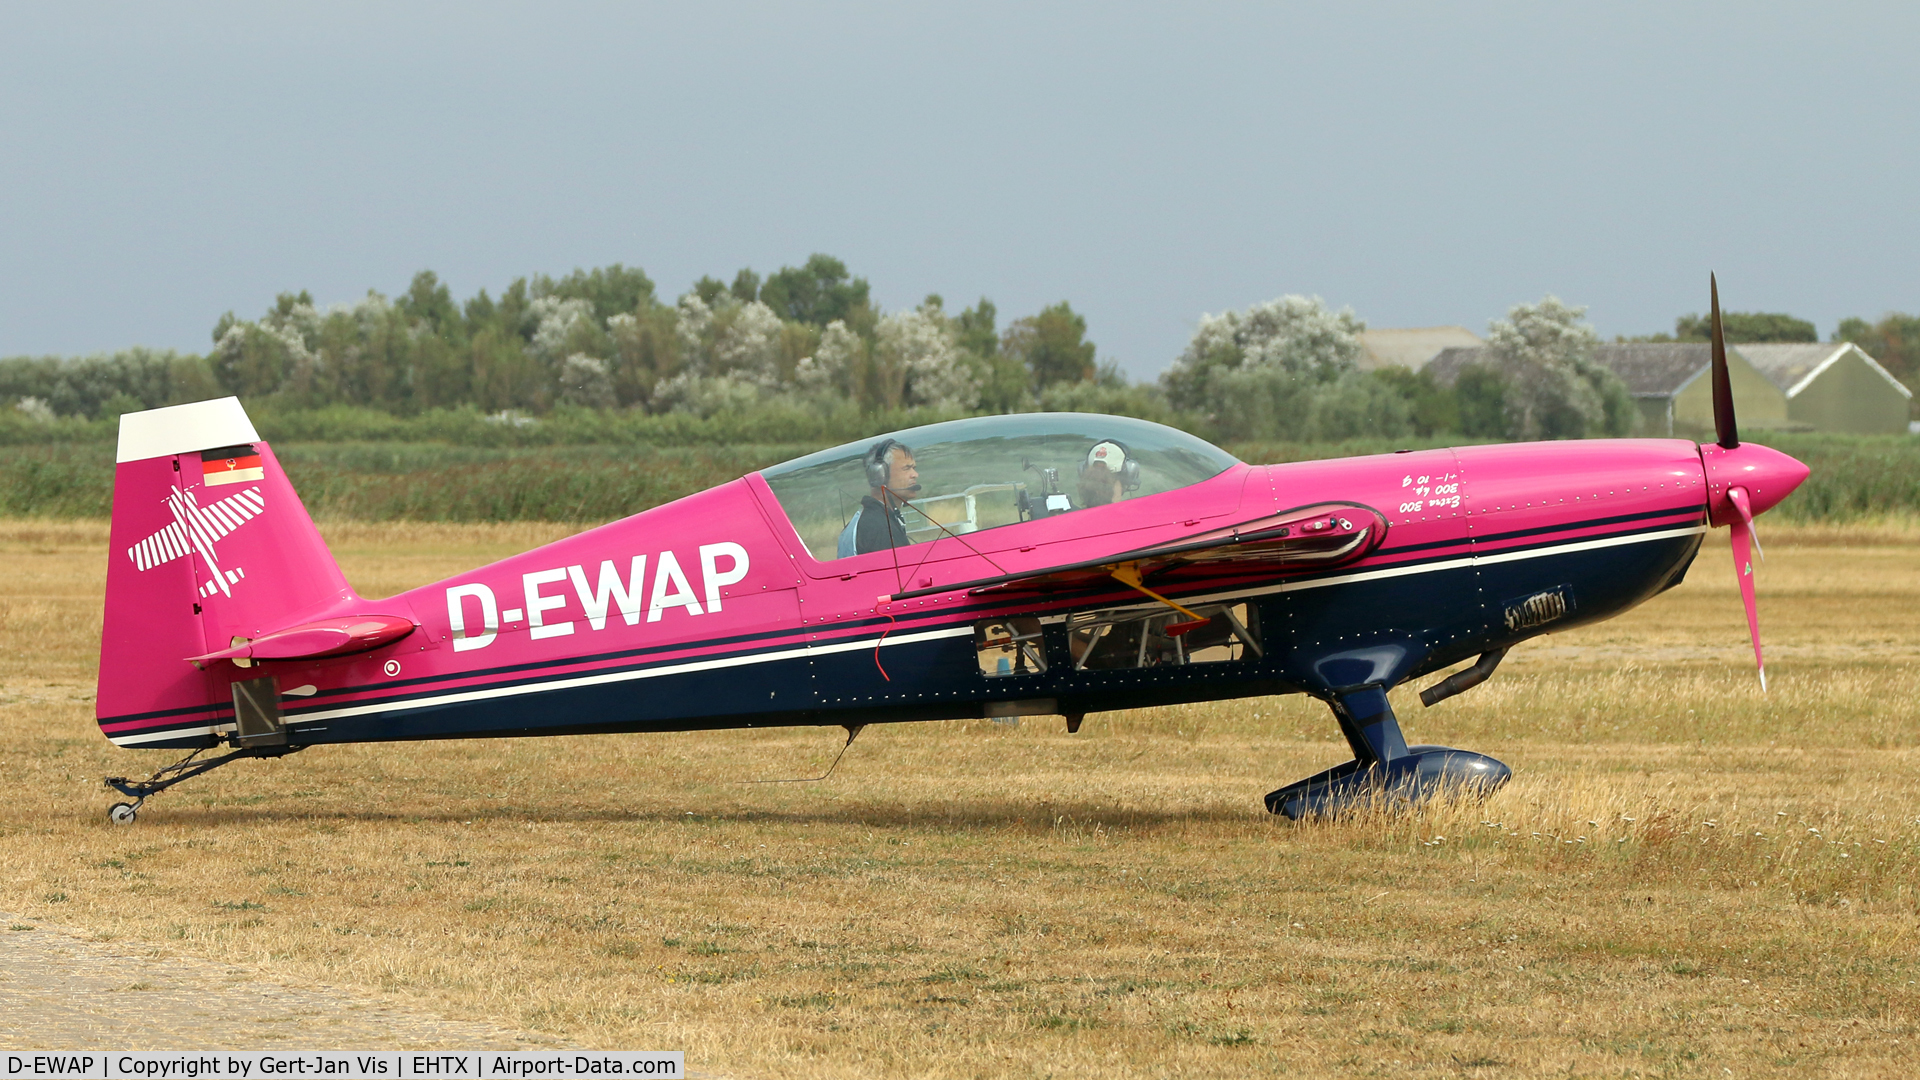 D-EWAP, 1992 Extra EA-300 C/N 034, Going out for his performance during Texel Air Show